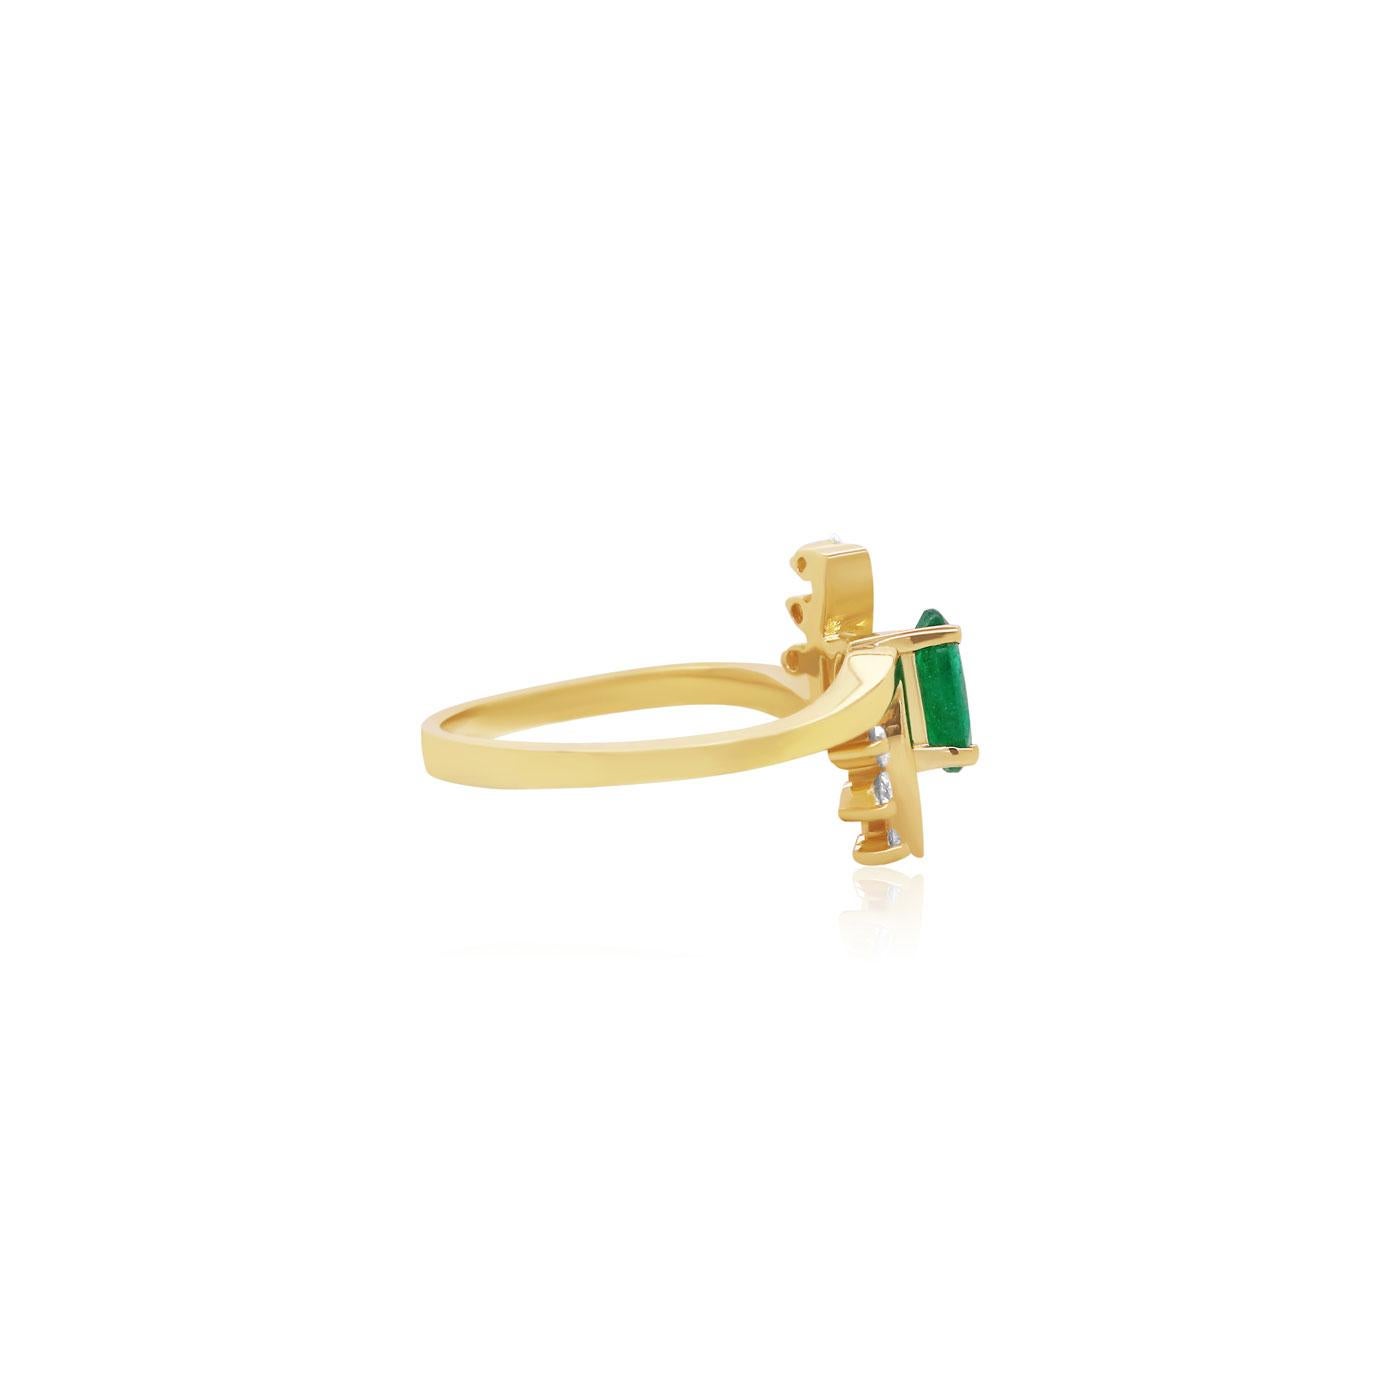 Material: 14K Yellow Gold 
1 Oval Emerald at 0.65 Carats 
6 Round Brilliant White Diamonds at 0.14 Carats Total Weight SI Quality /  H-I Color
Ring Size: 7.5 
Alberto offers complimentary sizing on all rings.

Fine one-of-a-kind craftsmanship meets